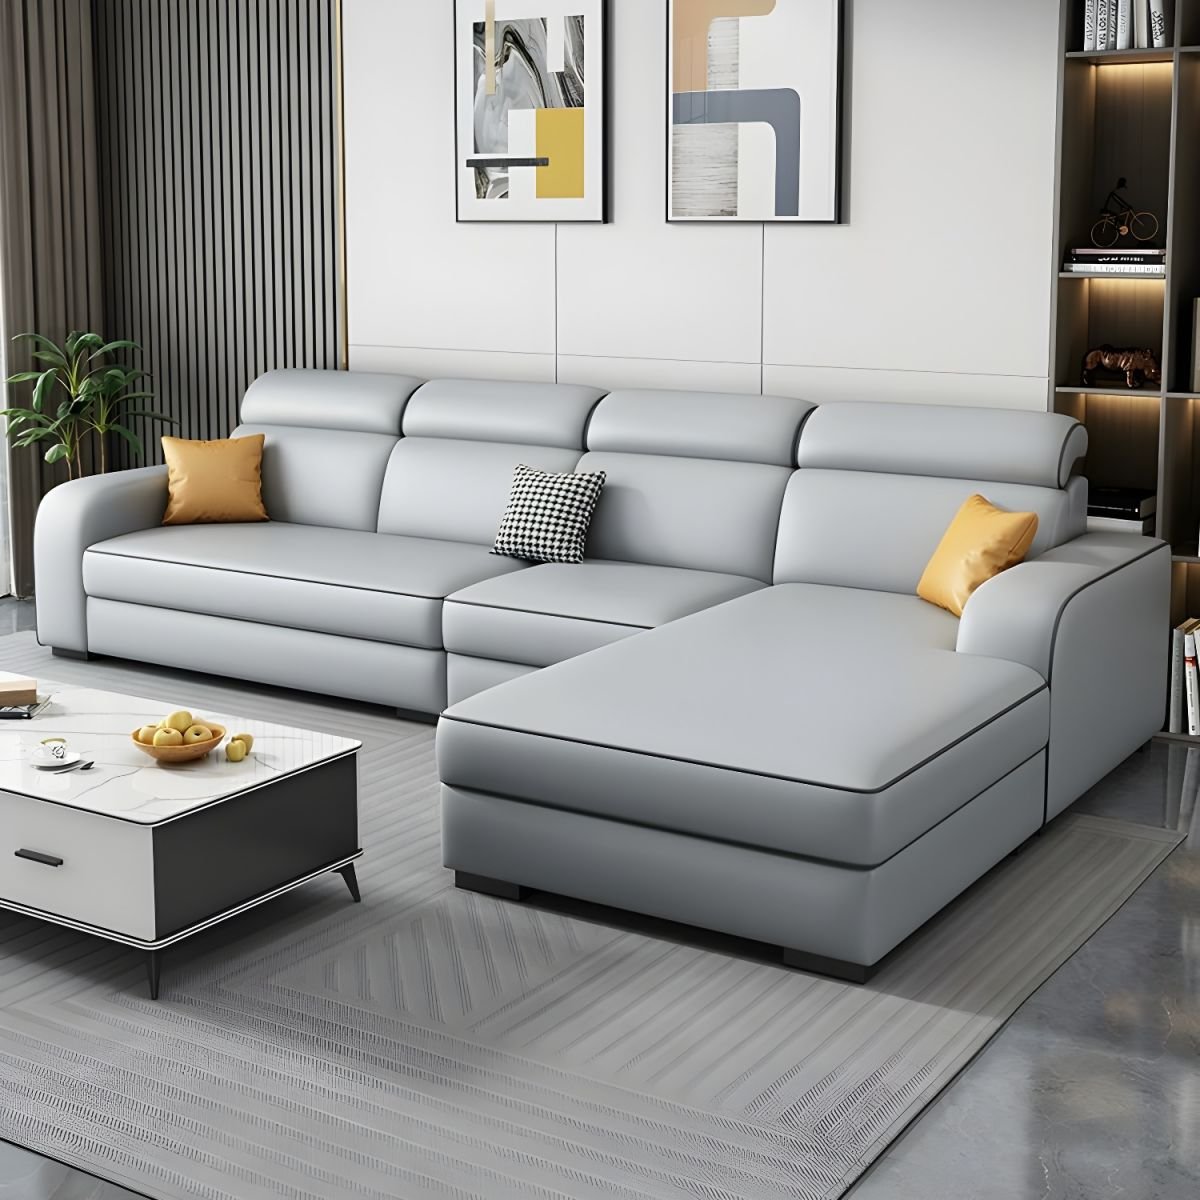 Contemporary Sectional Sofa with Adjustable Pillow and Scratch Resistant Upholstery - Anti Cat Scratch Leather 108"L x 63"W x 31"H Light Gray